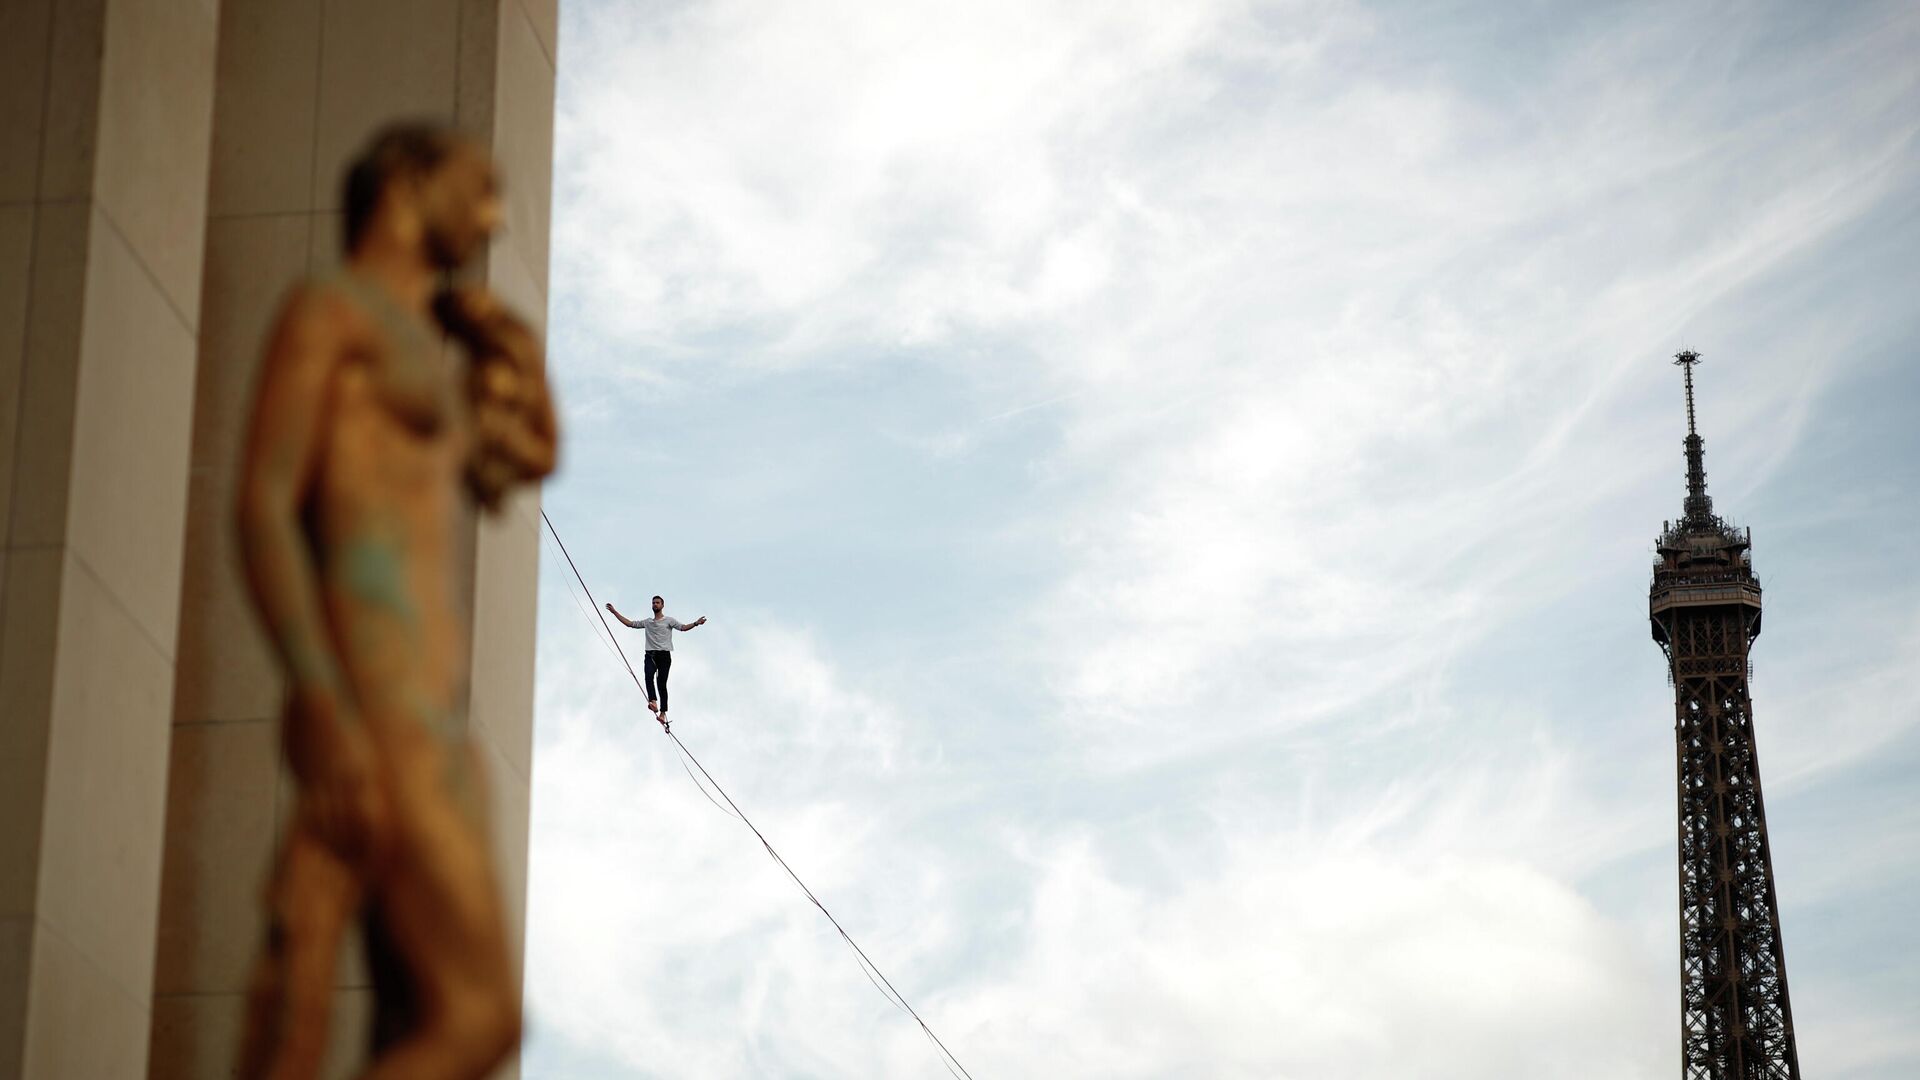 French acrobat Nathan Paulin walks on a slackline between the Eiffel Tower and the Theatre National de Chaillot as part of events around France for National Heritage Day in Paris, France, September 18, 2021 - Sputnik International, 1920, 19.09.2021